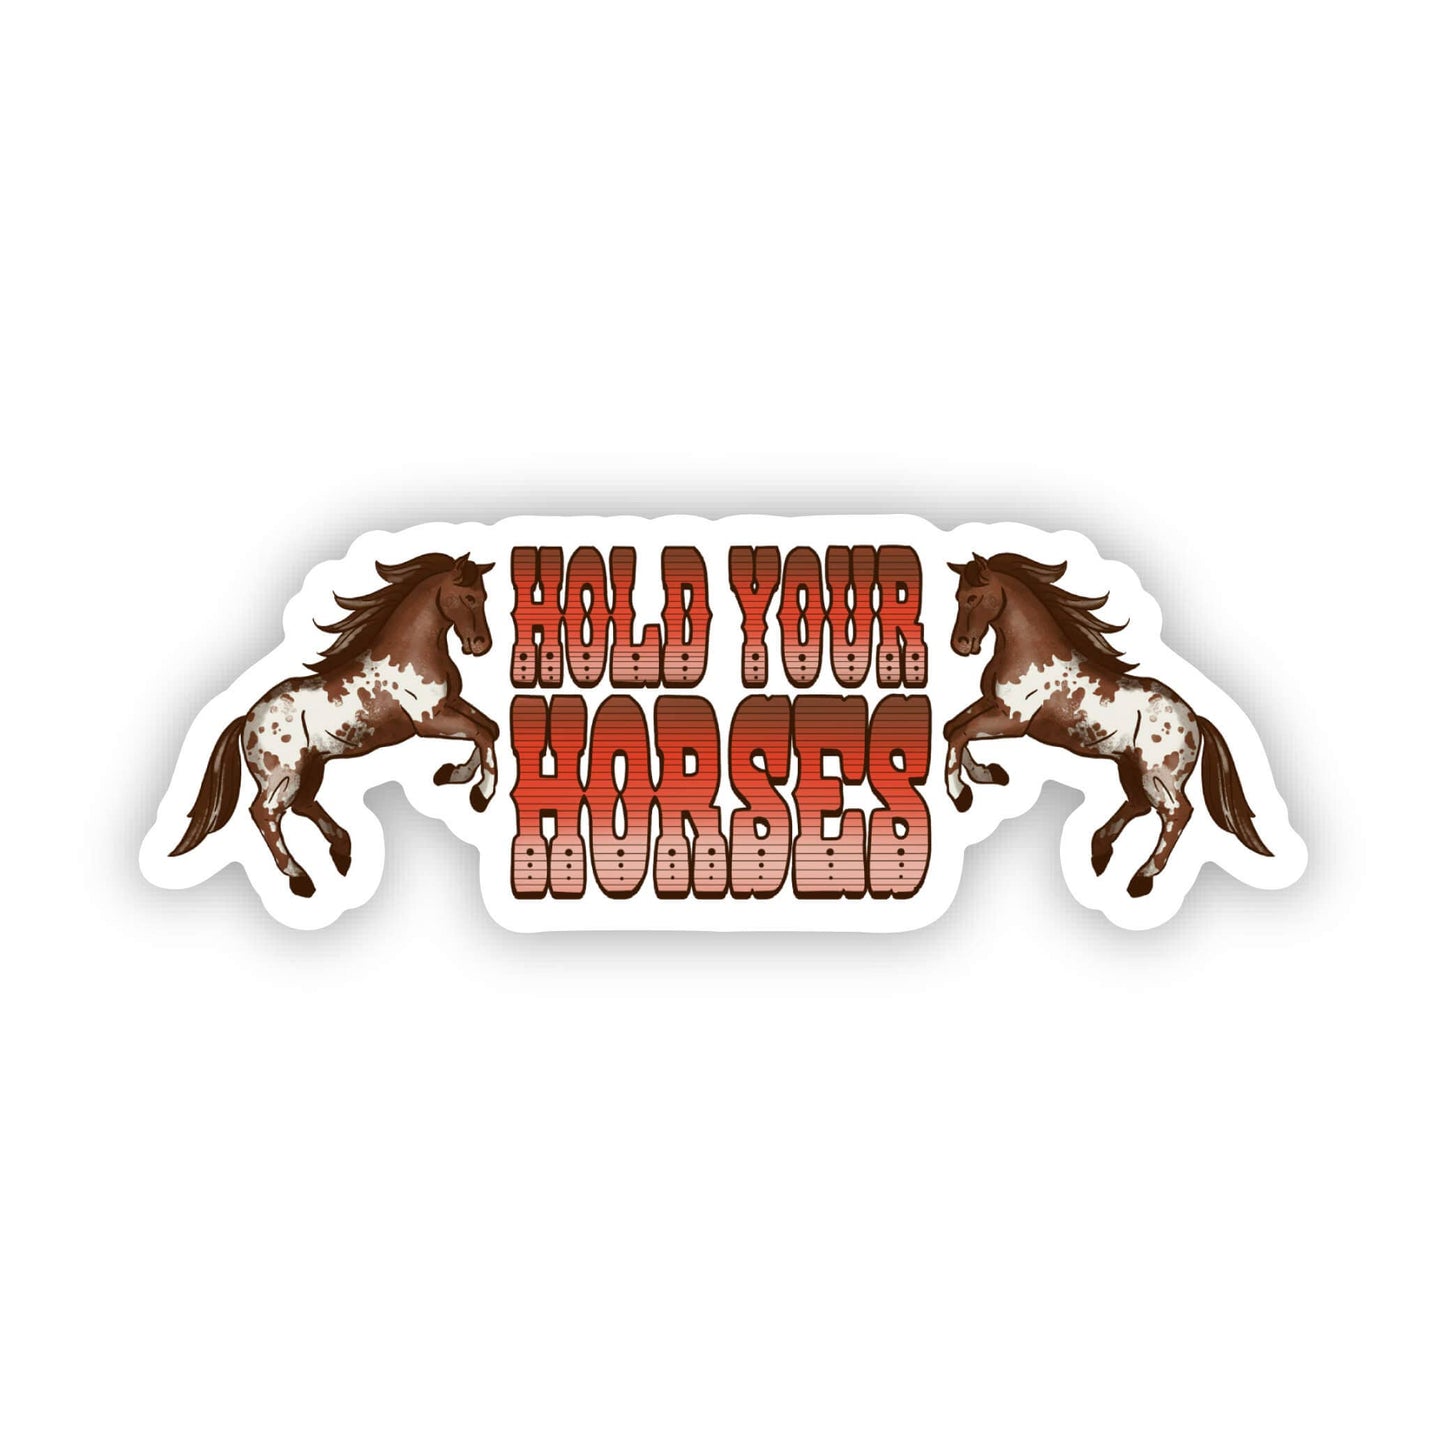 Big Moods - "Hold Your Horses" Sticker